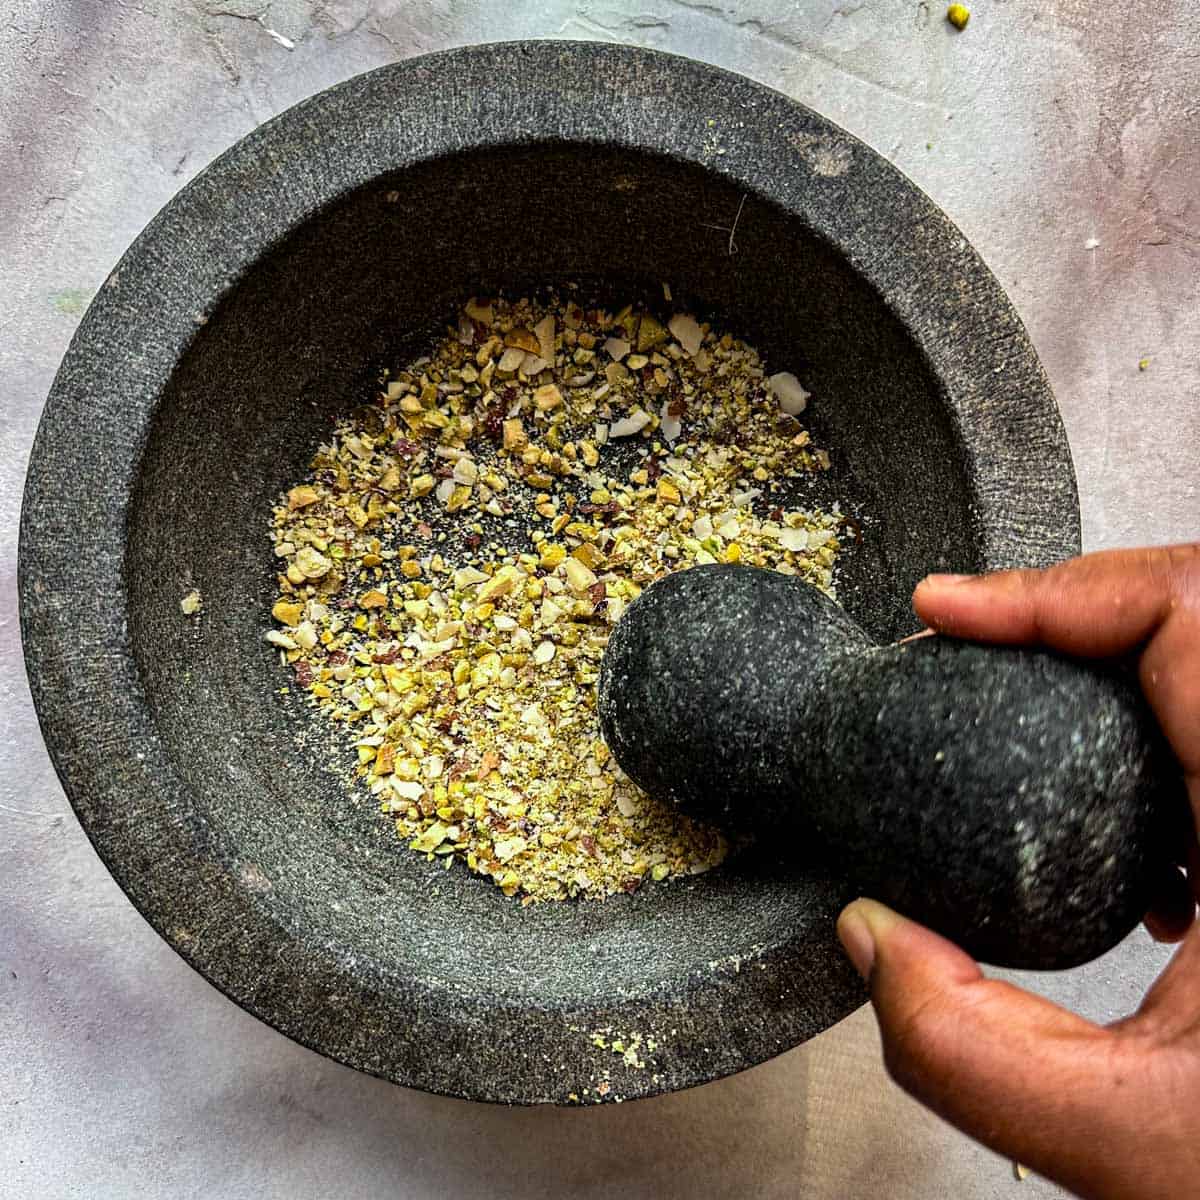 Crushed pistachios in a mortar and pestle